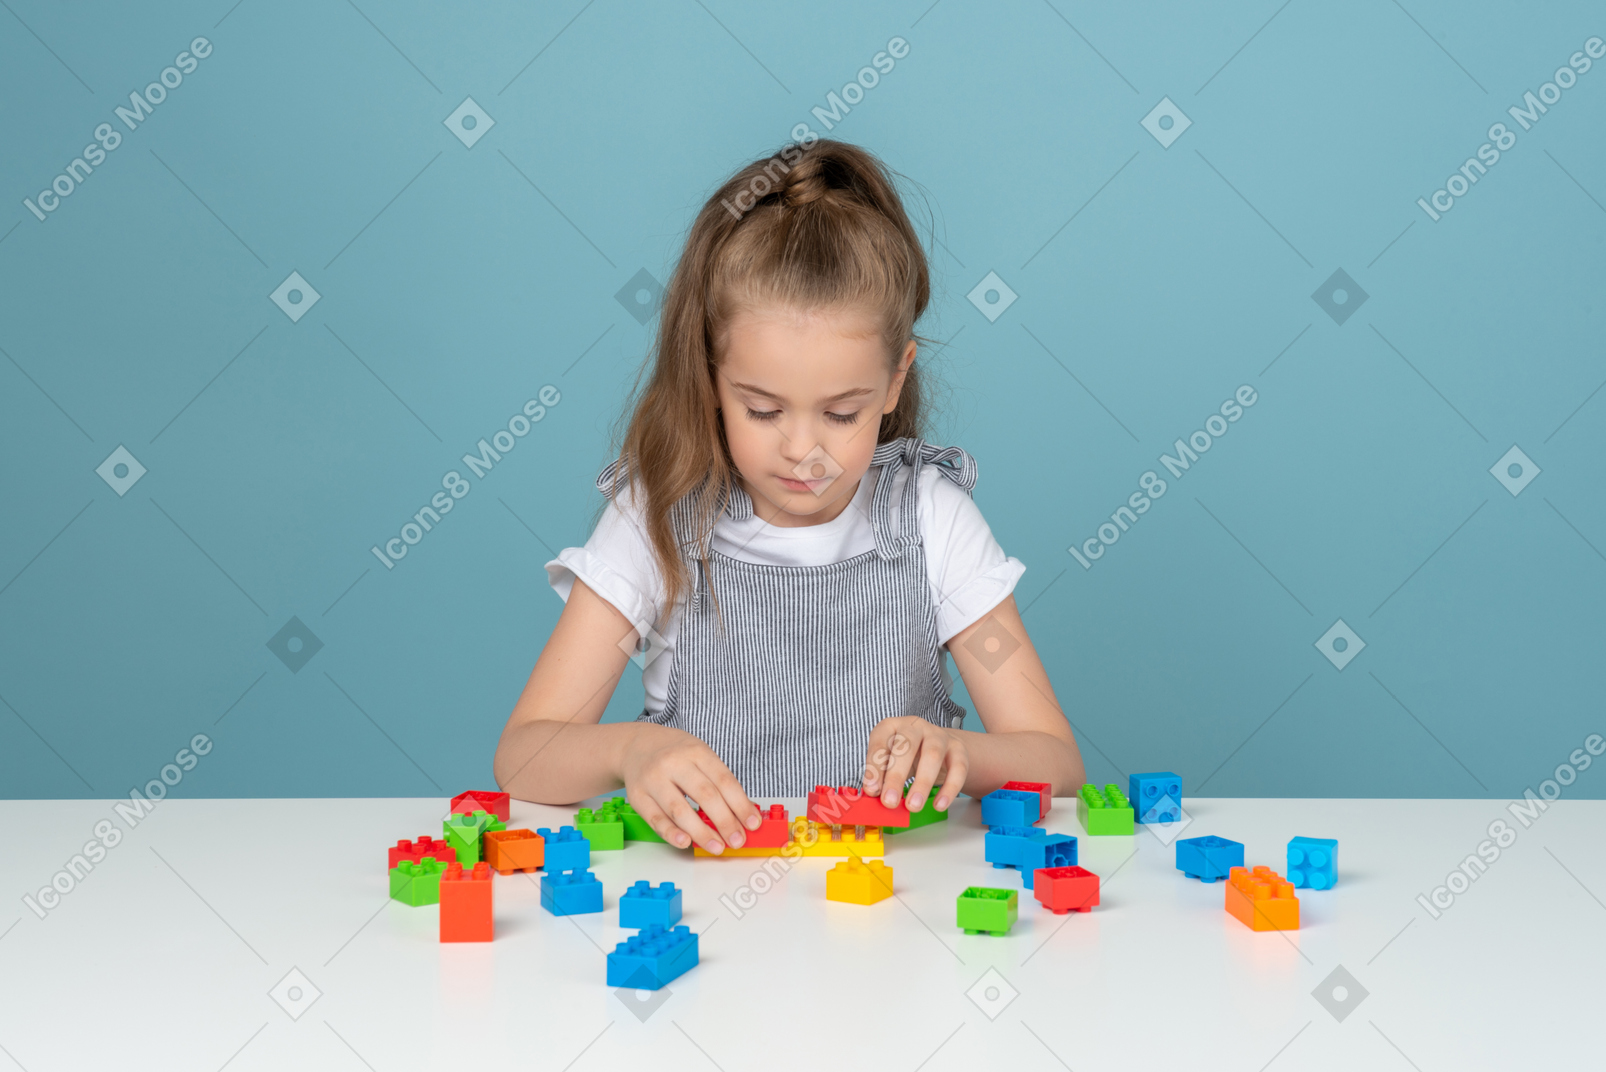 Focused little girl playing with building blocks